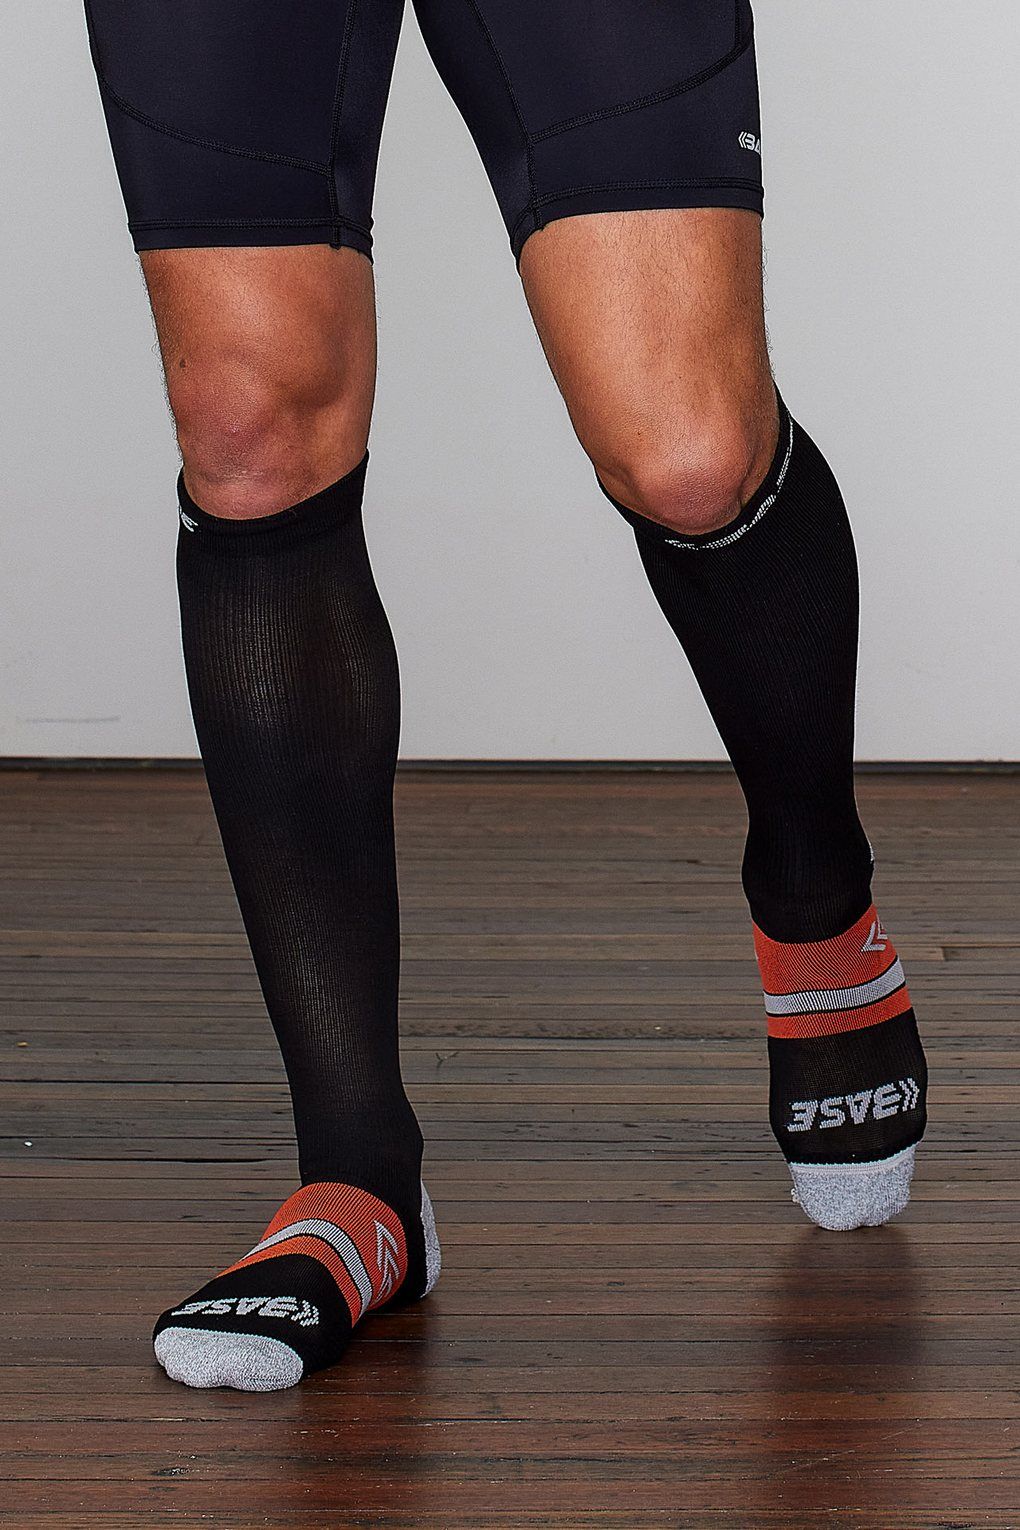 – Graduated Muscle Support Athletic or Medical 6-Pack Men’s Compression Socks